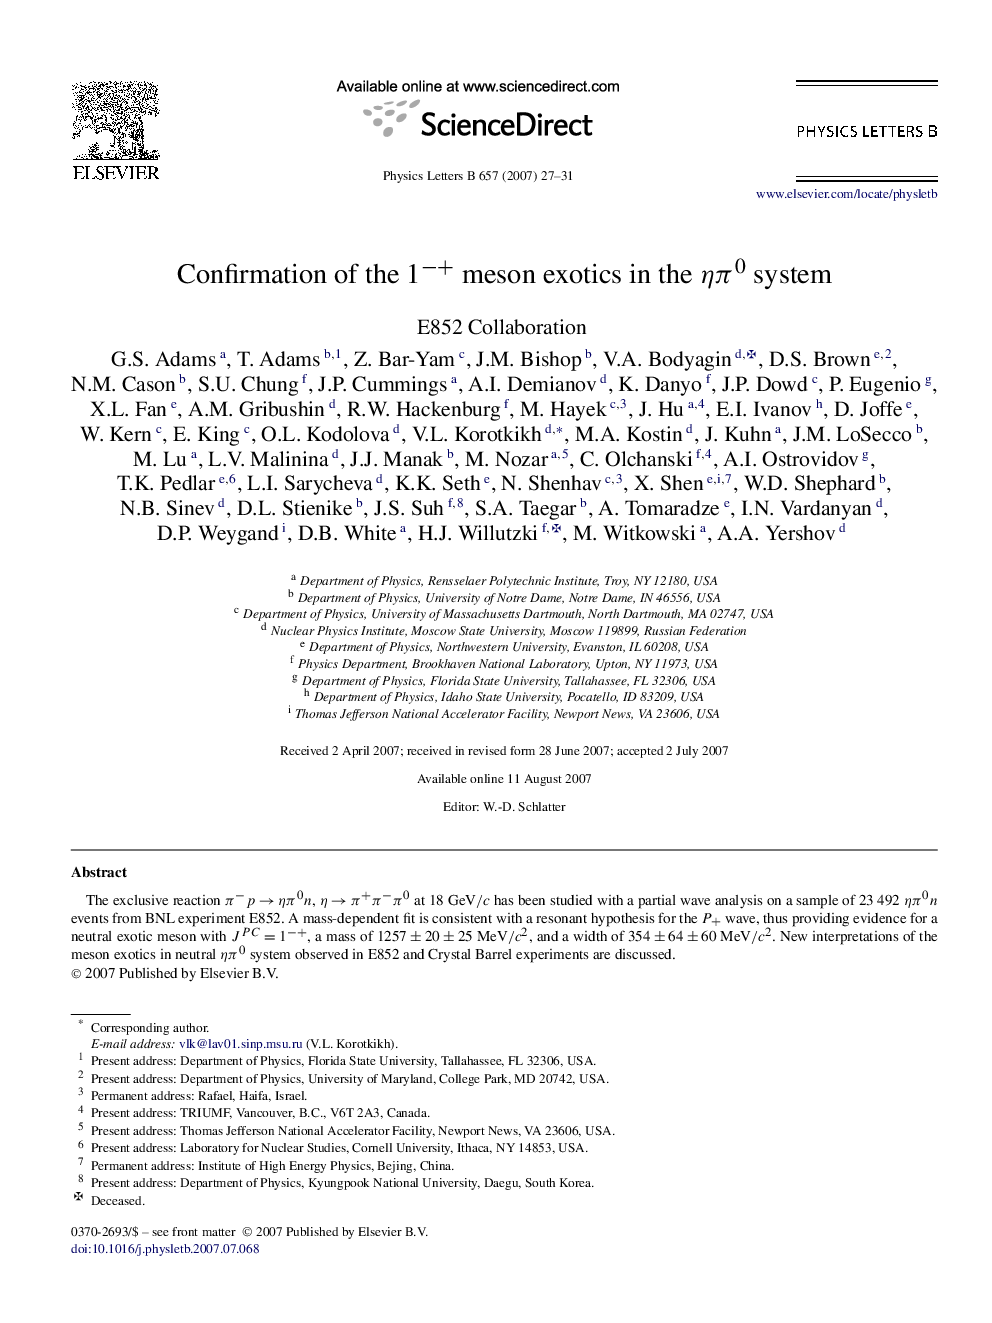 Confirmation of the 1â+ meson exotics in the Î·Ï0 system